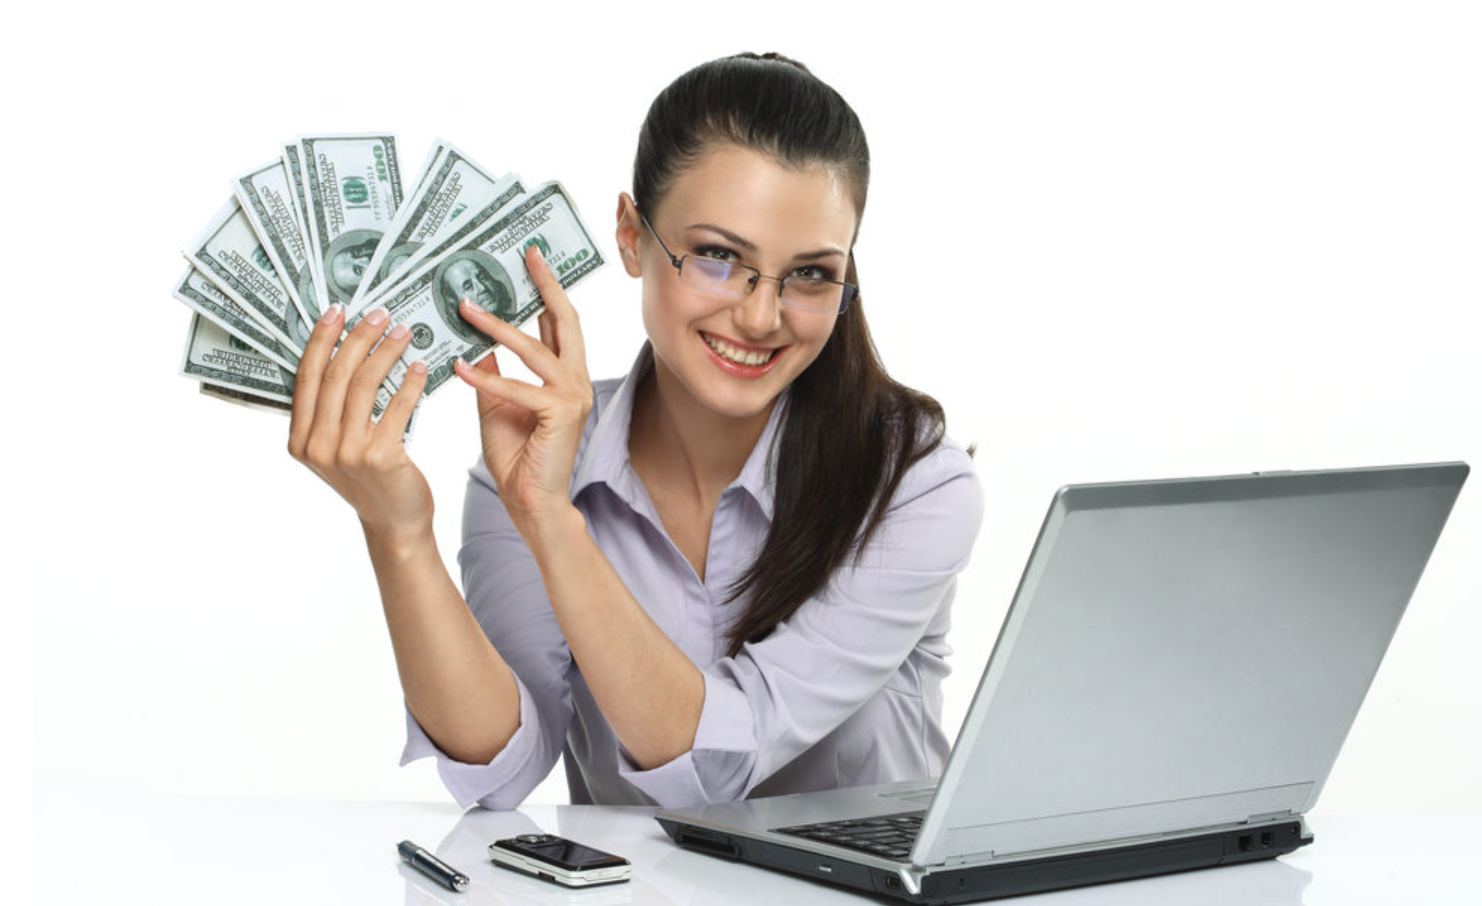 APPLY FOR AN ONLINE INSTALLMENT LOAN TO EASE YOUR FINANCIAL MESS!